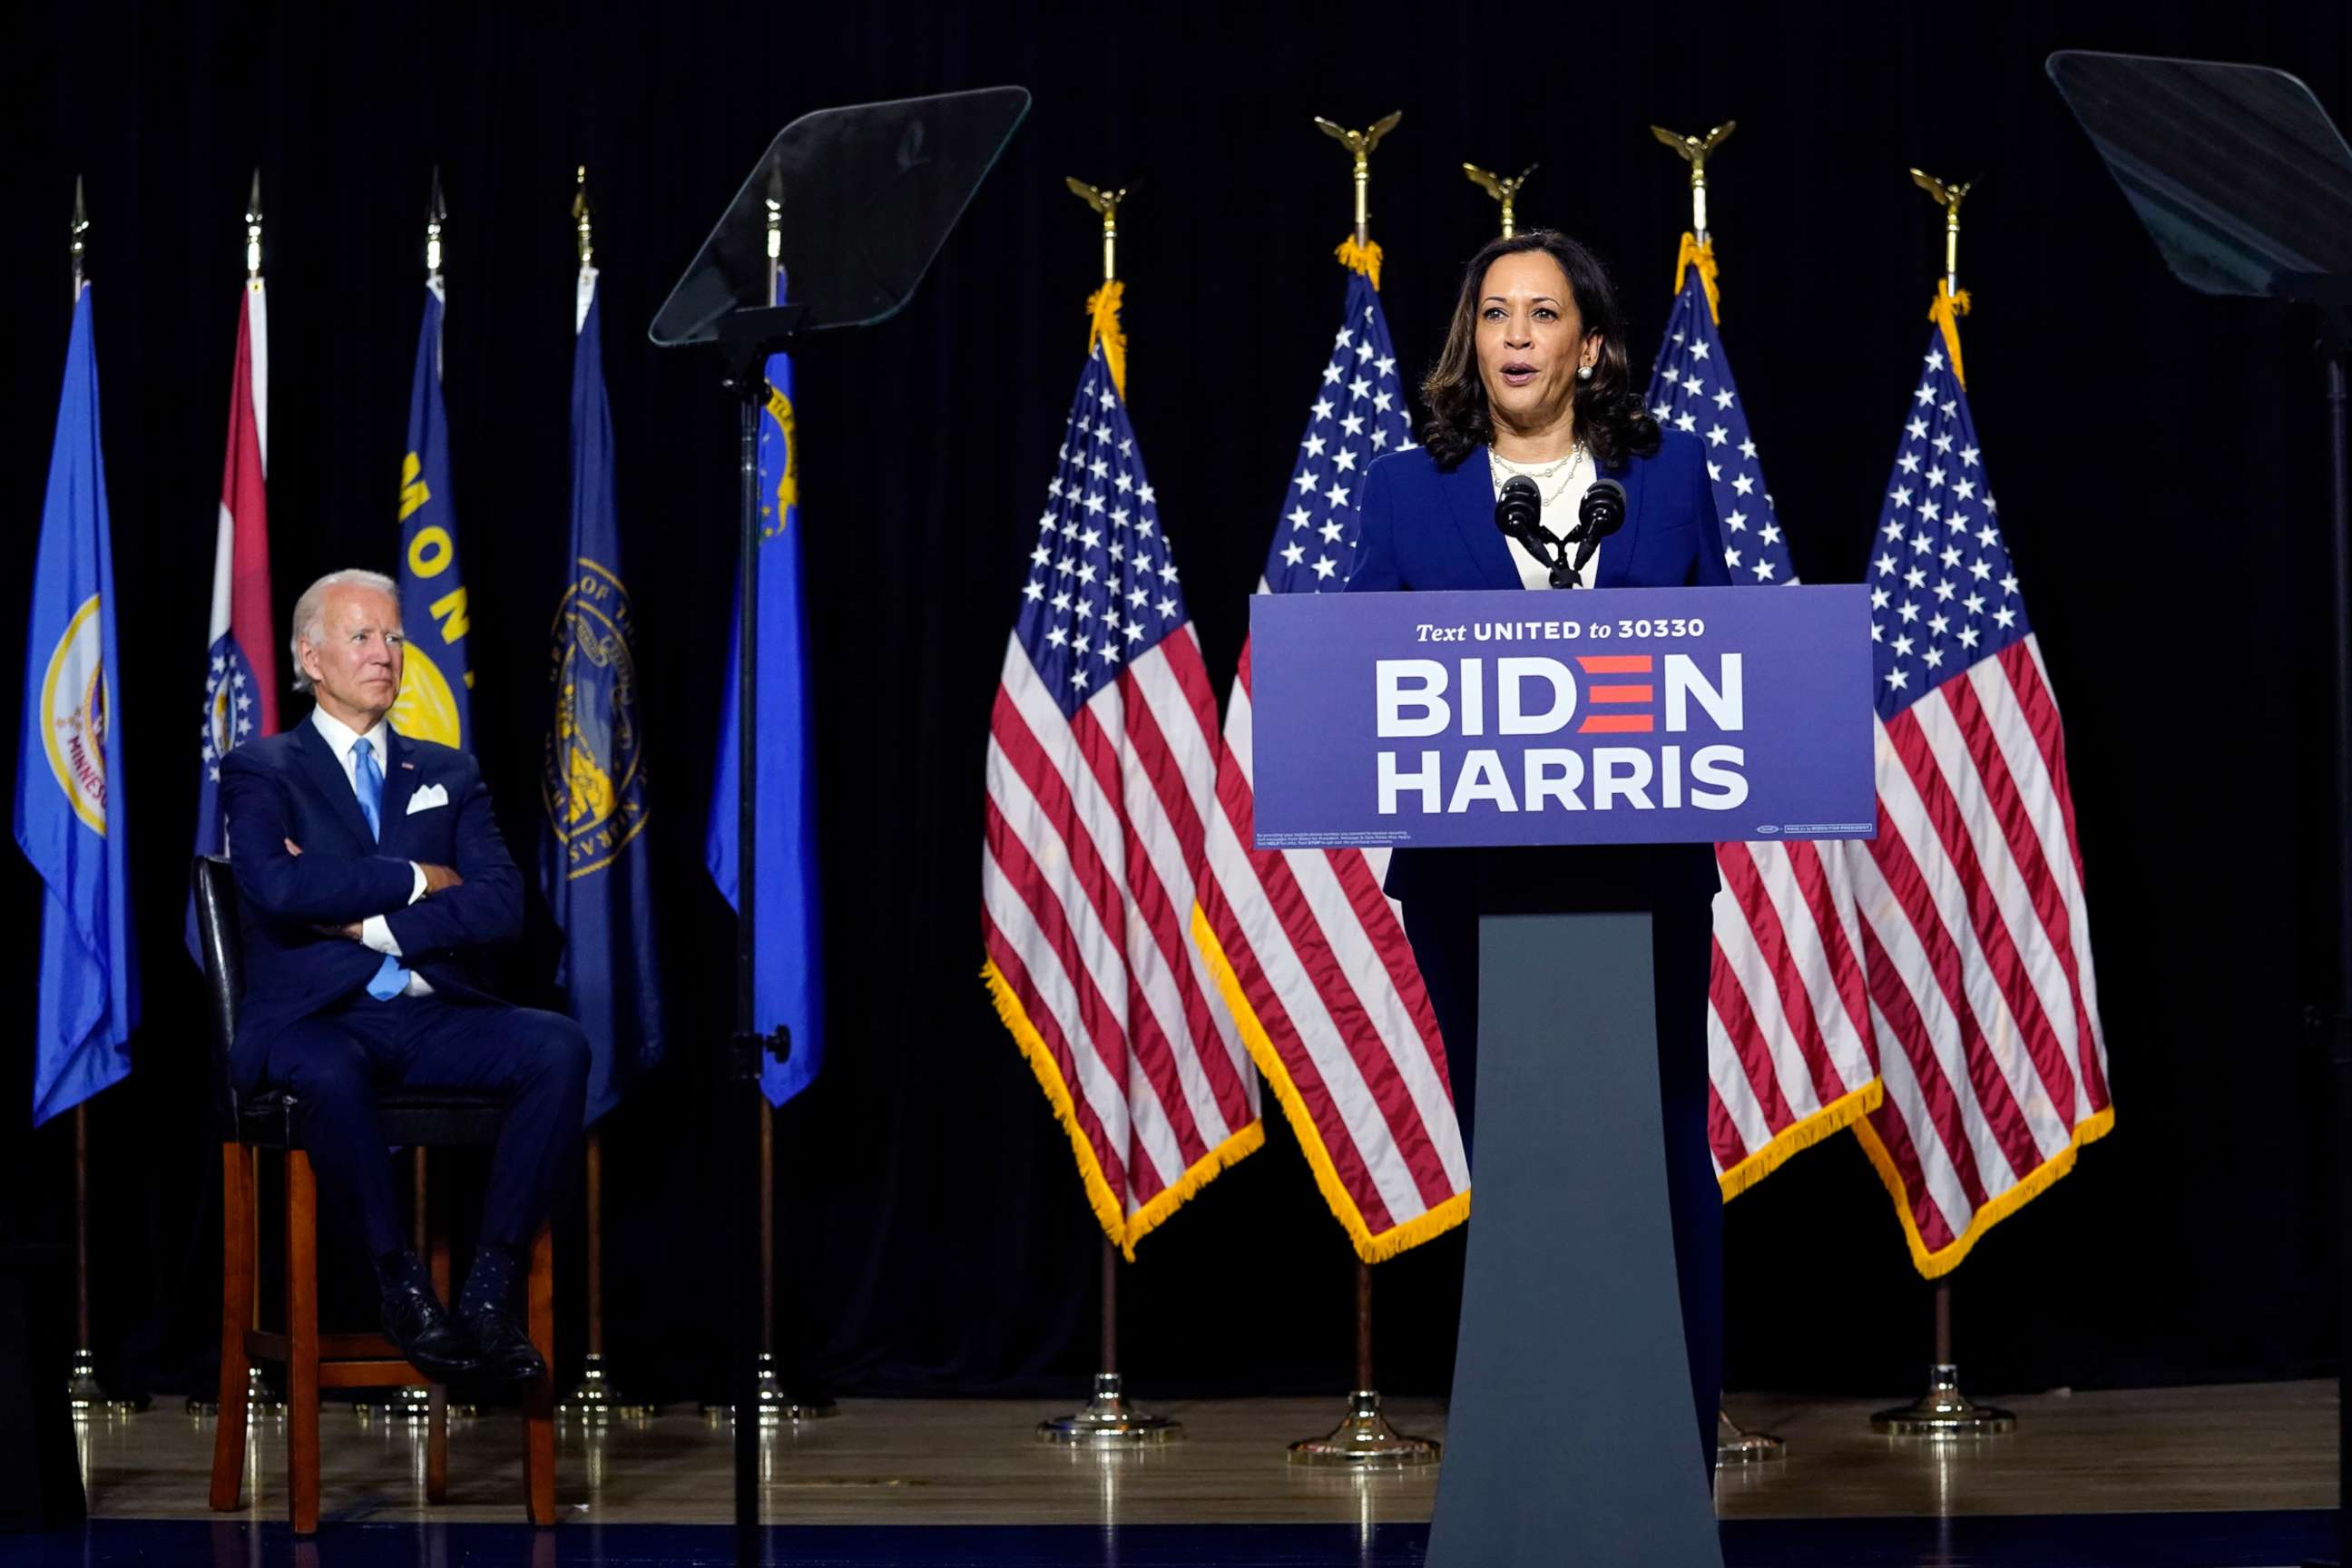 PHOTO: Democratic presidential candidate former Vice President Joe Biden listens as his running mate Sen. Kamala Harris speaks during a campaign event at Alexis Dupont High School in Wilmington, Del., Aug. 12, 2020.